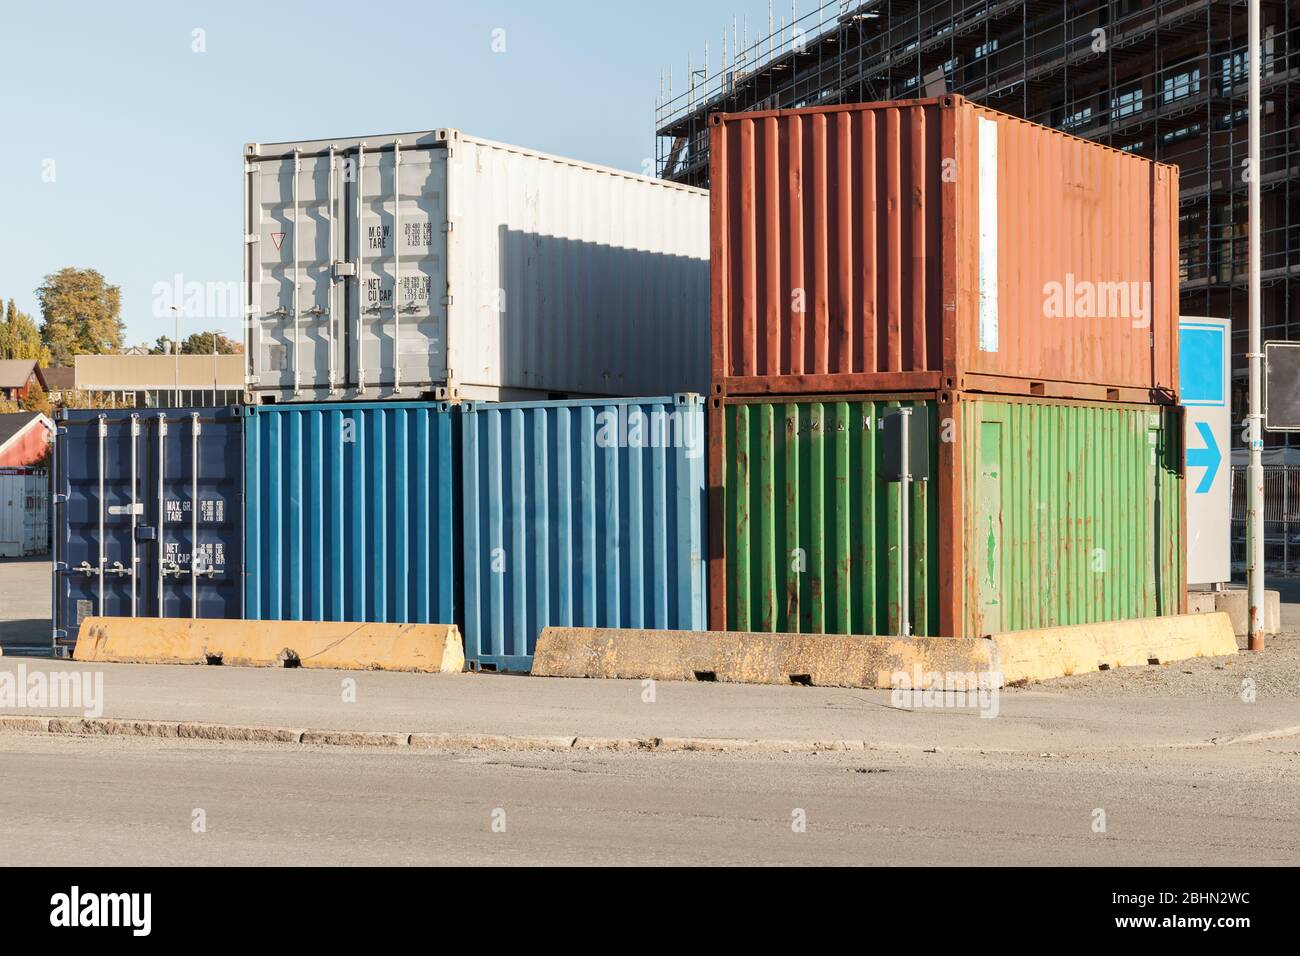 Stacked group of cargo containers is in a port district, modern industrial shipping equipment Stock Photo